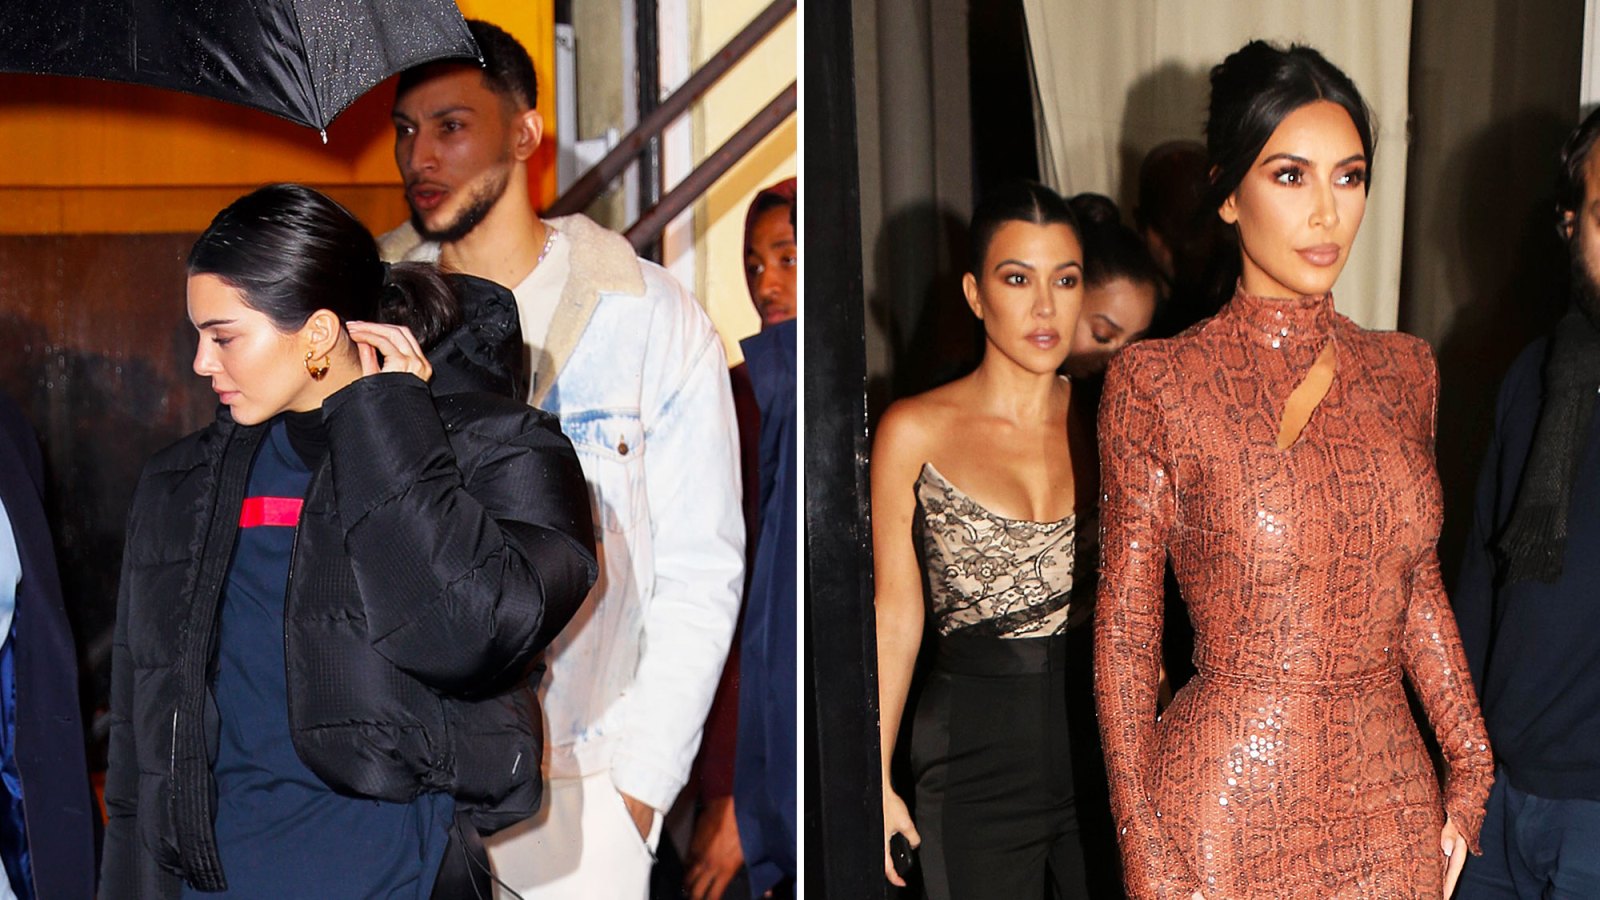 Kendall Jenner and Ben Simmons Dine Out With Kim and Kourtney Kardashian in NYC